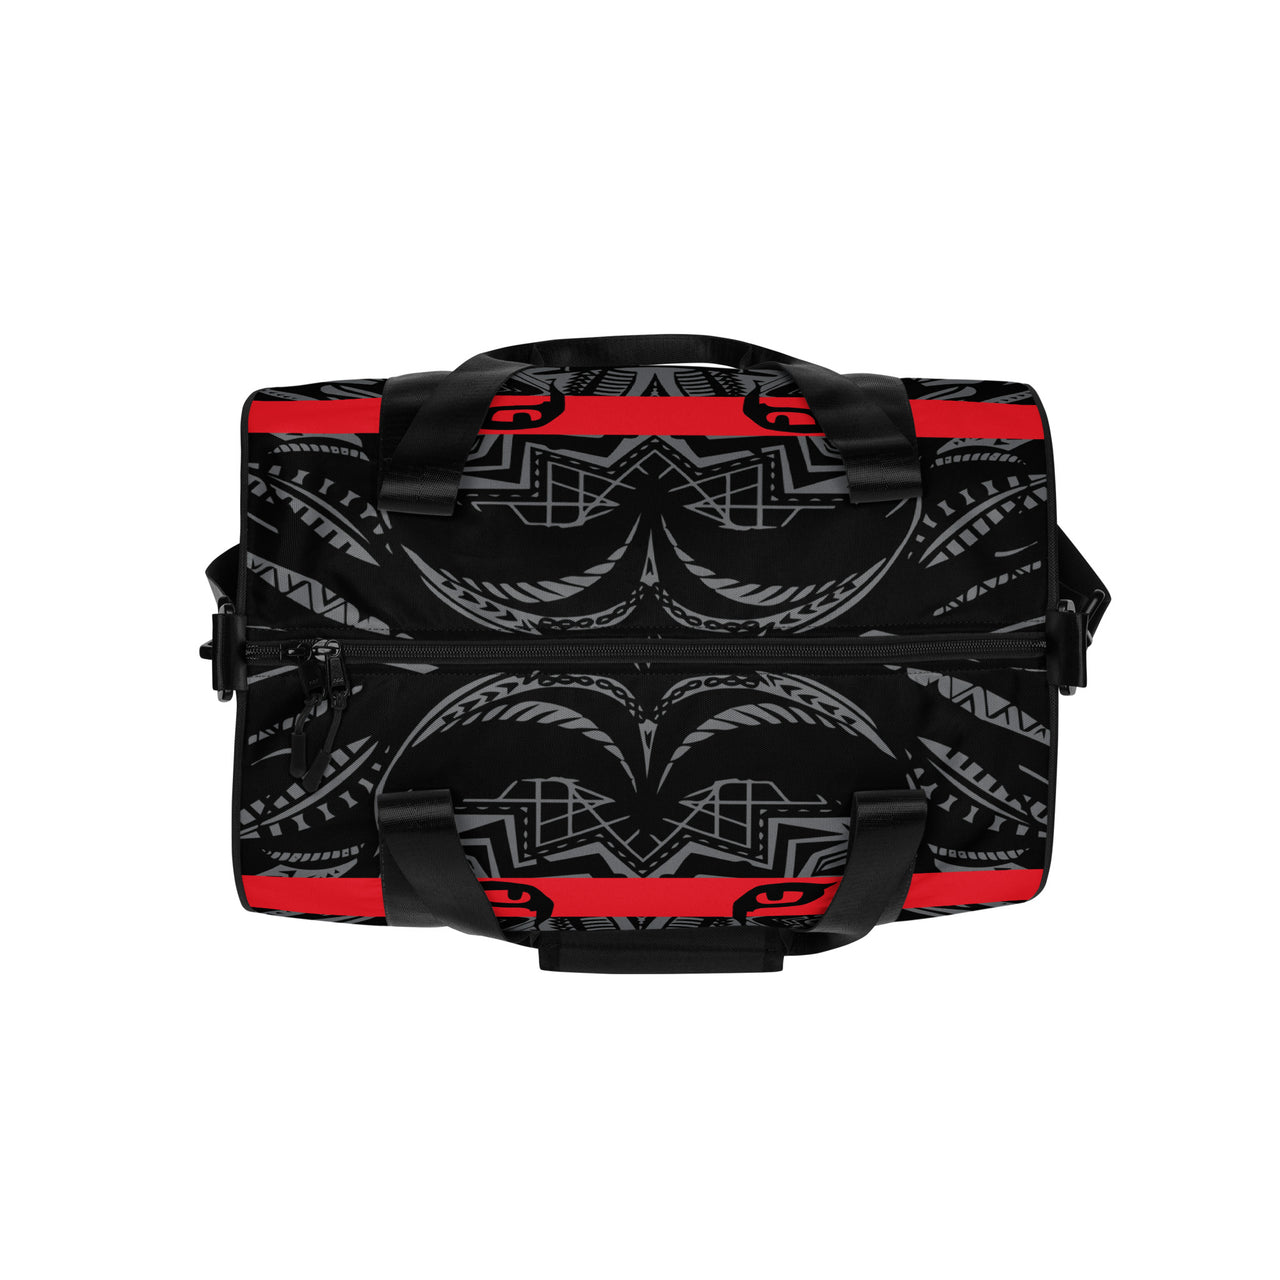 NXXT Red Eye Lion All-over print gym bag - Shady Lion Coffee Co.